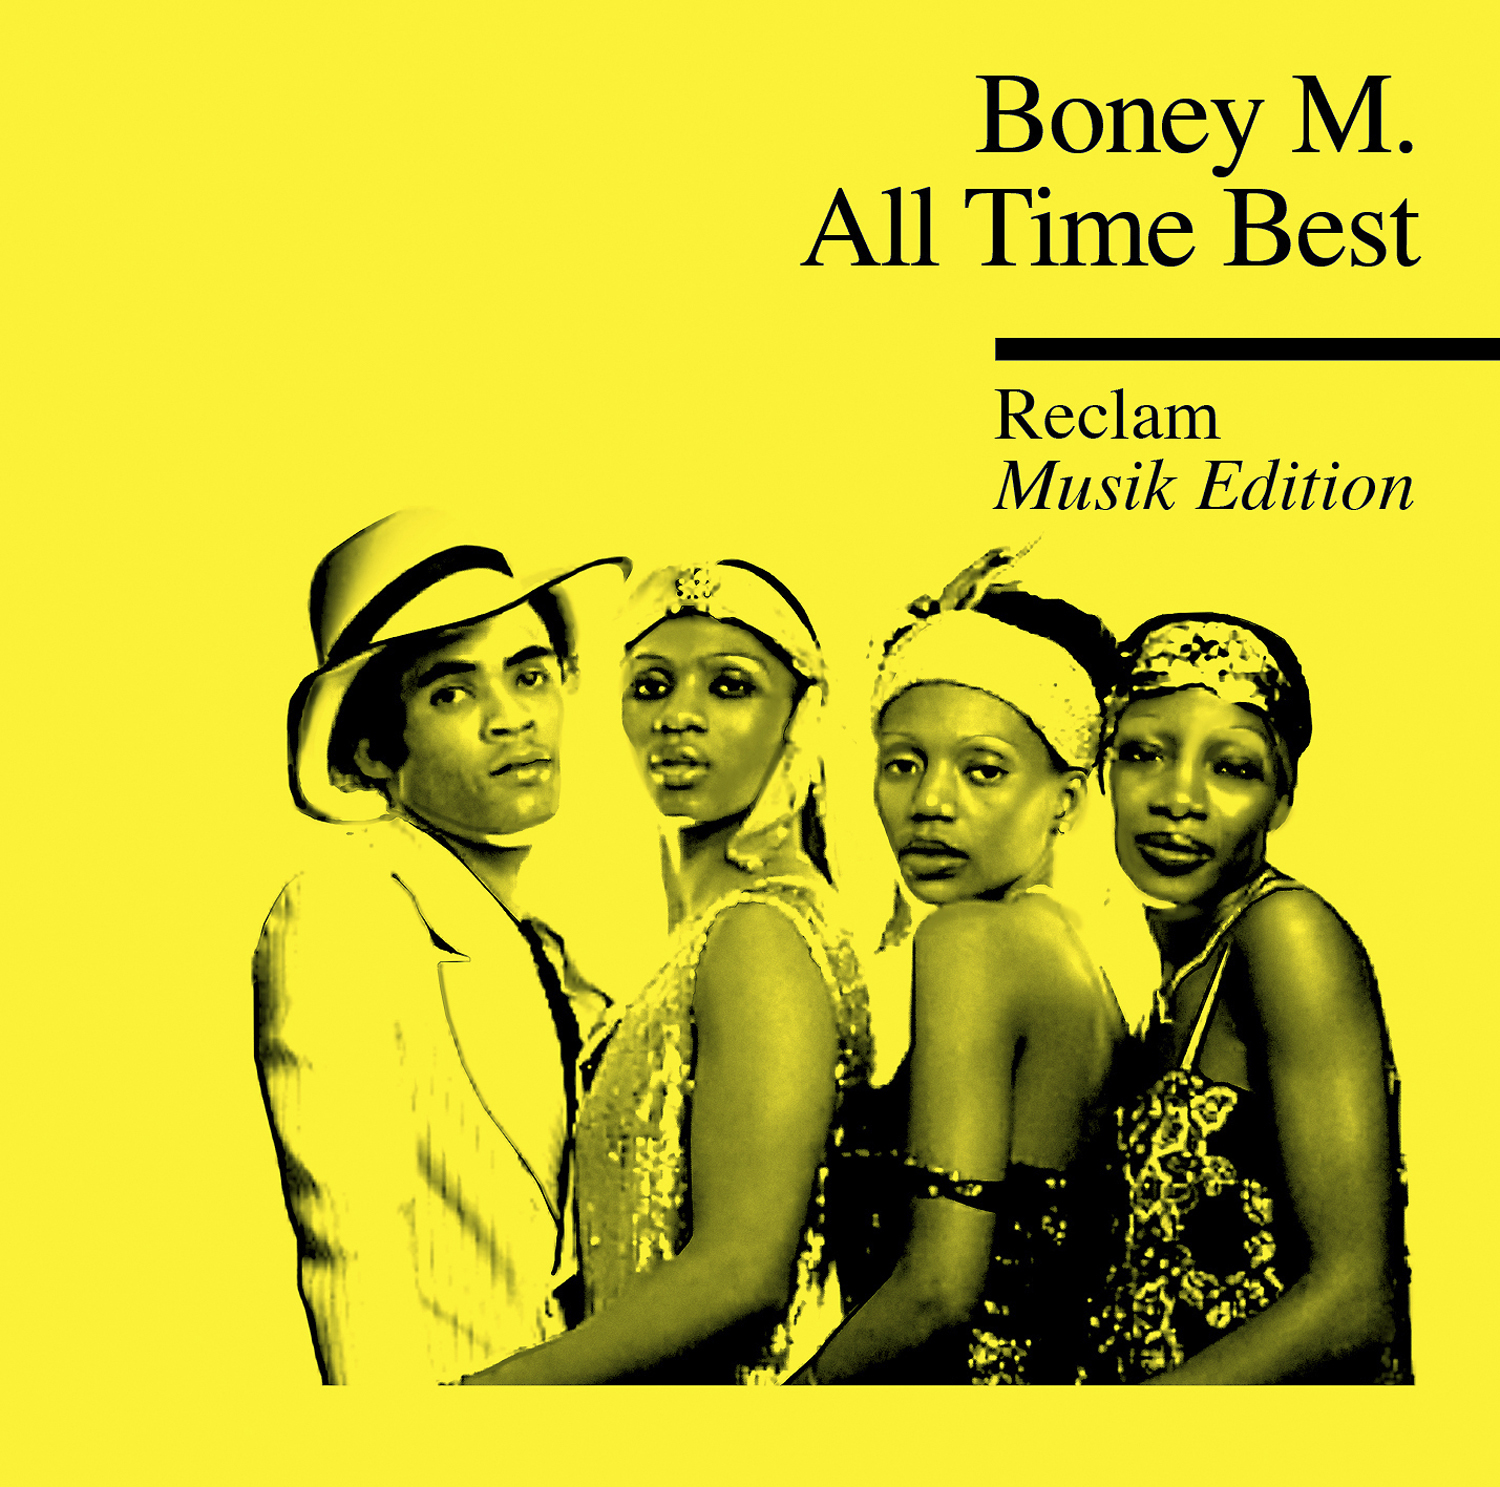 Boney M. - "All Time Best - Reclam Musik Edition"